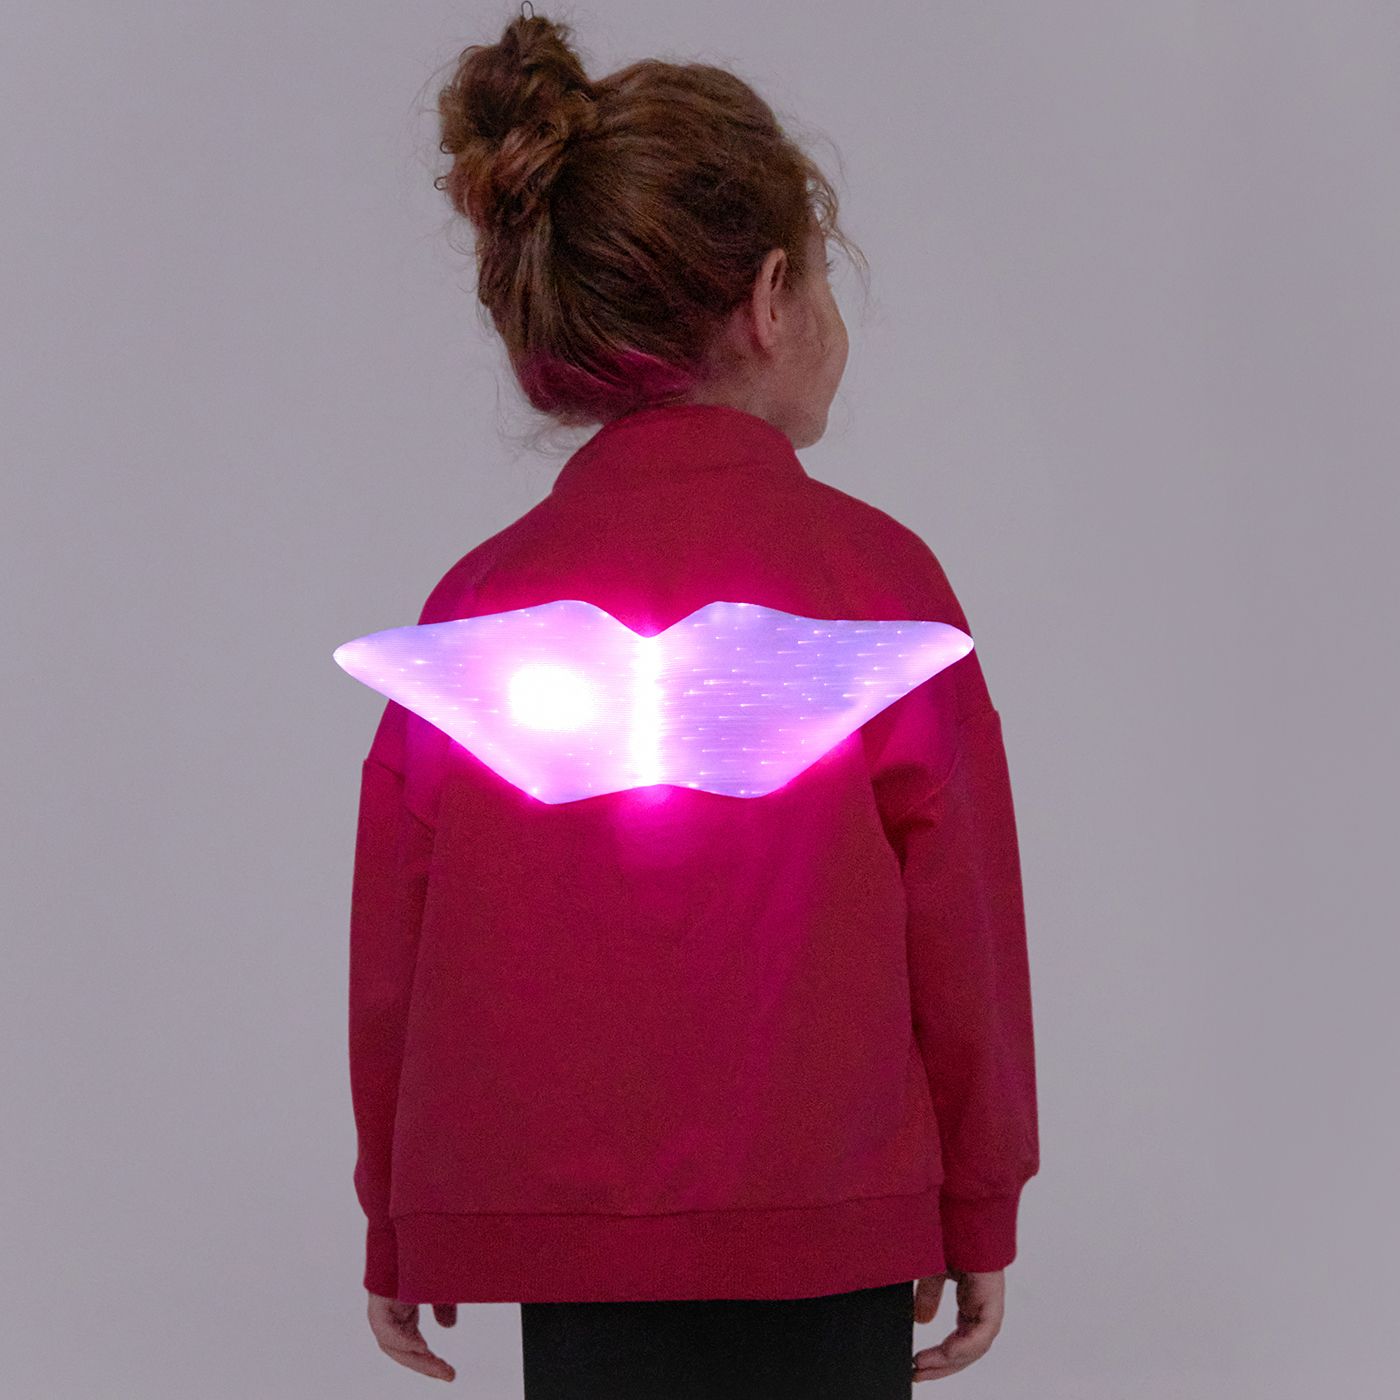 Go-Glow Illuminating Jacket With Light Up Wings Including Controller (Built-In Battery)